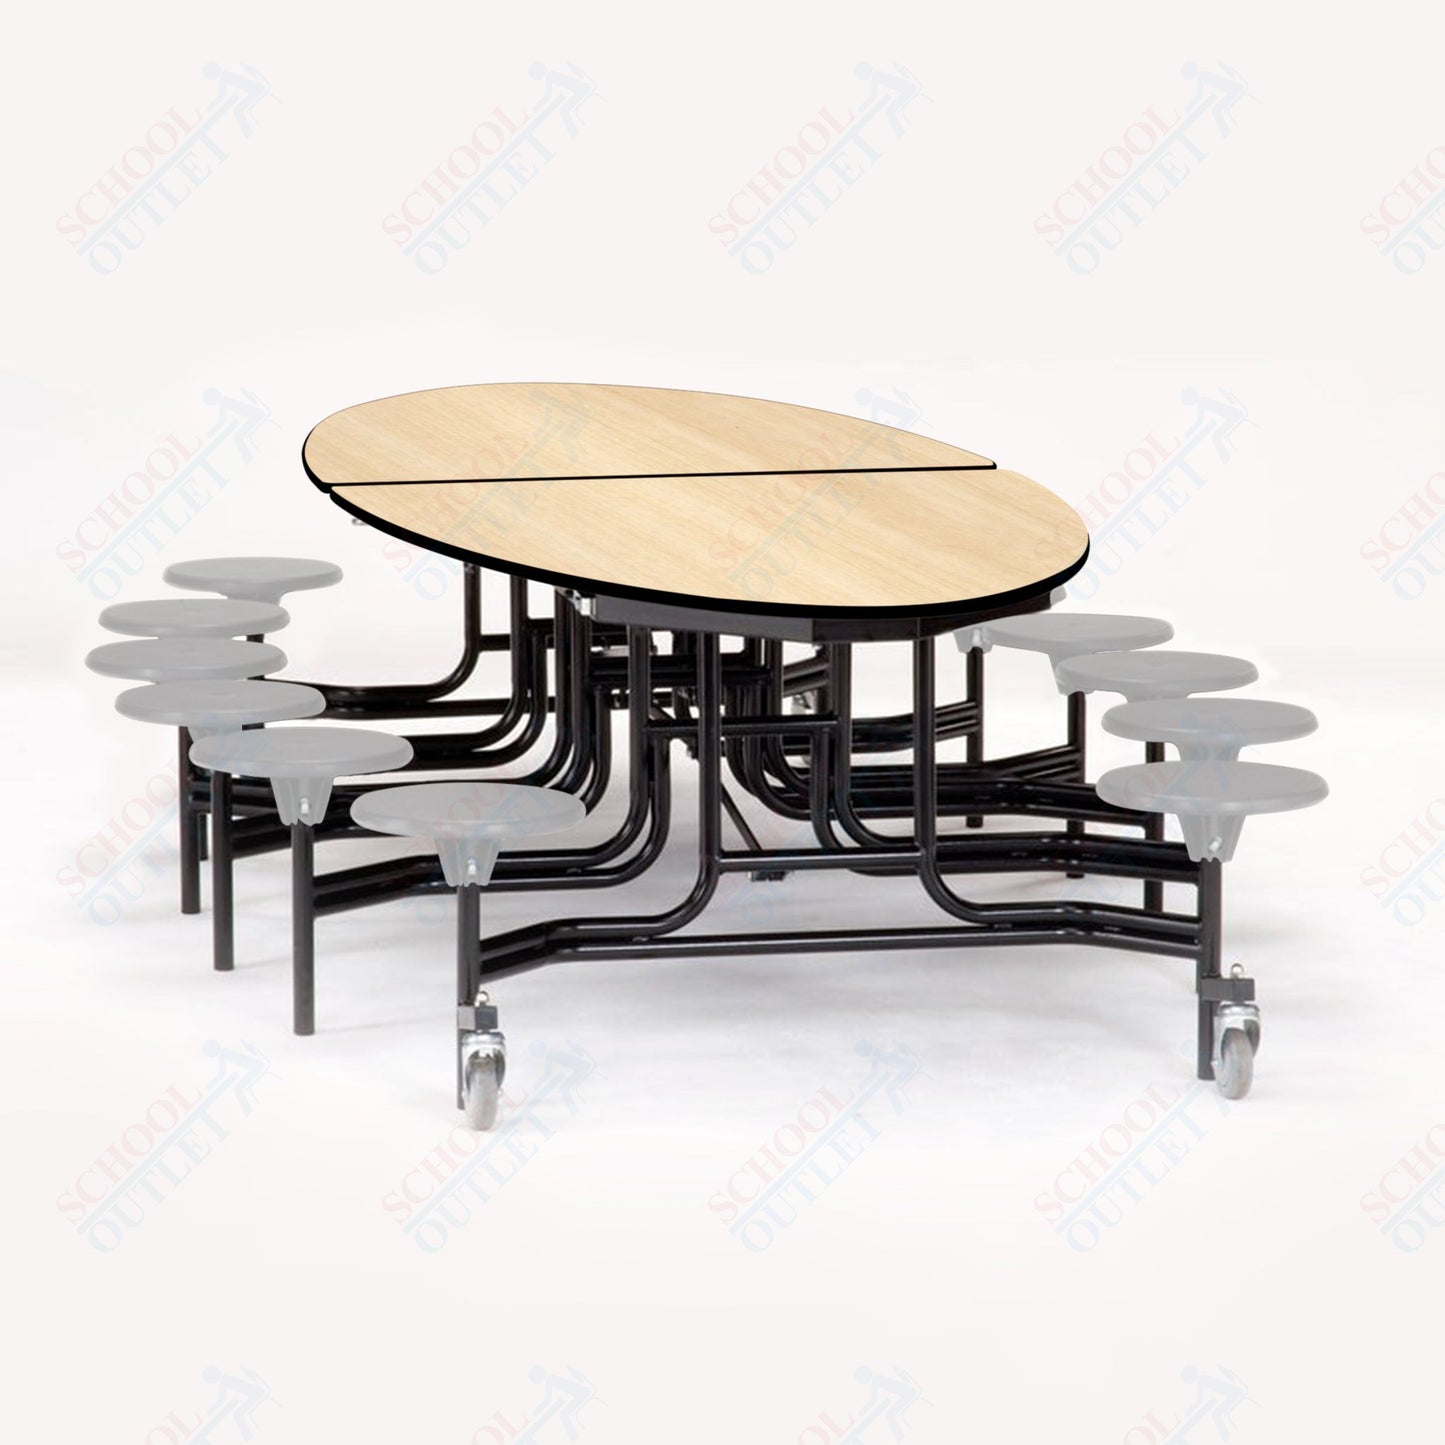 NPS 10' Elliptical Mobile Cafeteria Table - 12 Stools - Plywood Core - T-Molding Edge - Black Powdercoated Frame